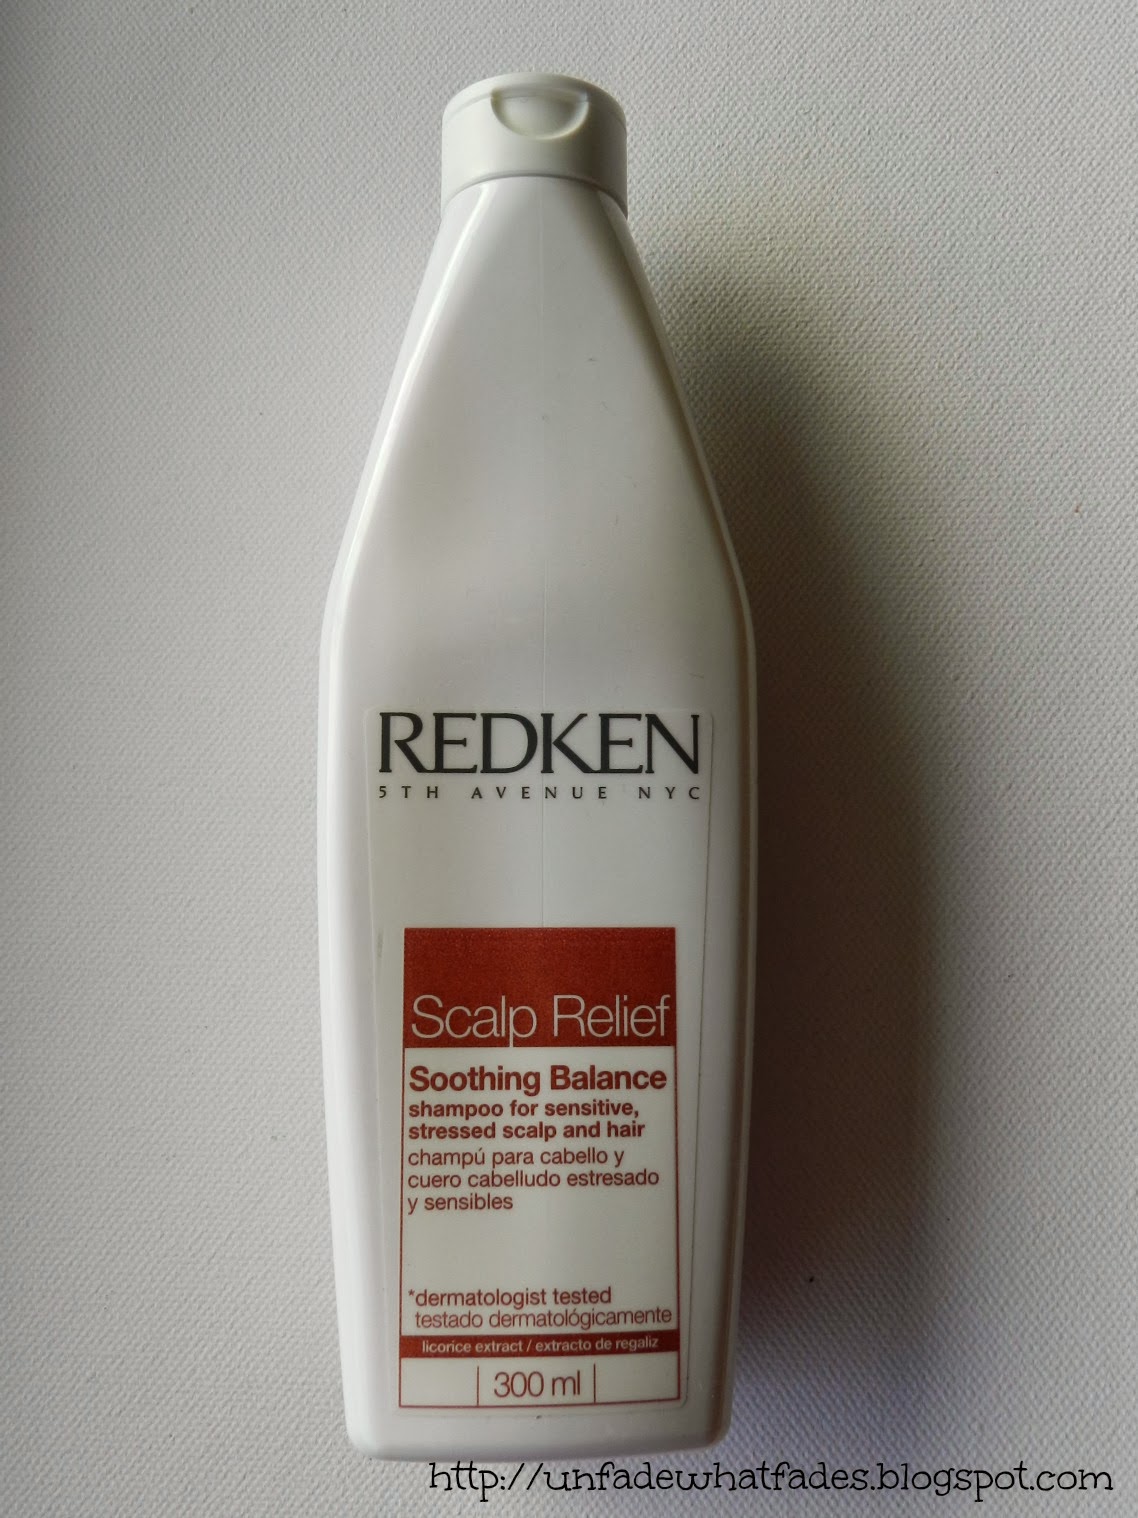 bruge peregrination beløb Unfade what fades: Redken Scalp Relief Soothing Balance Shampoo review